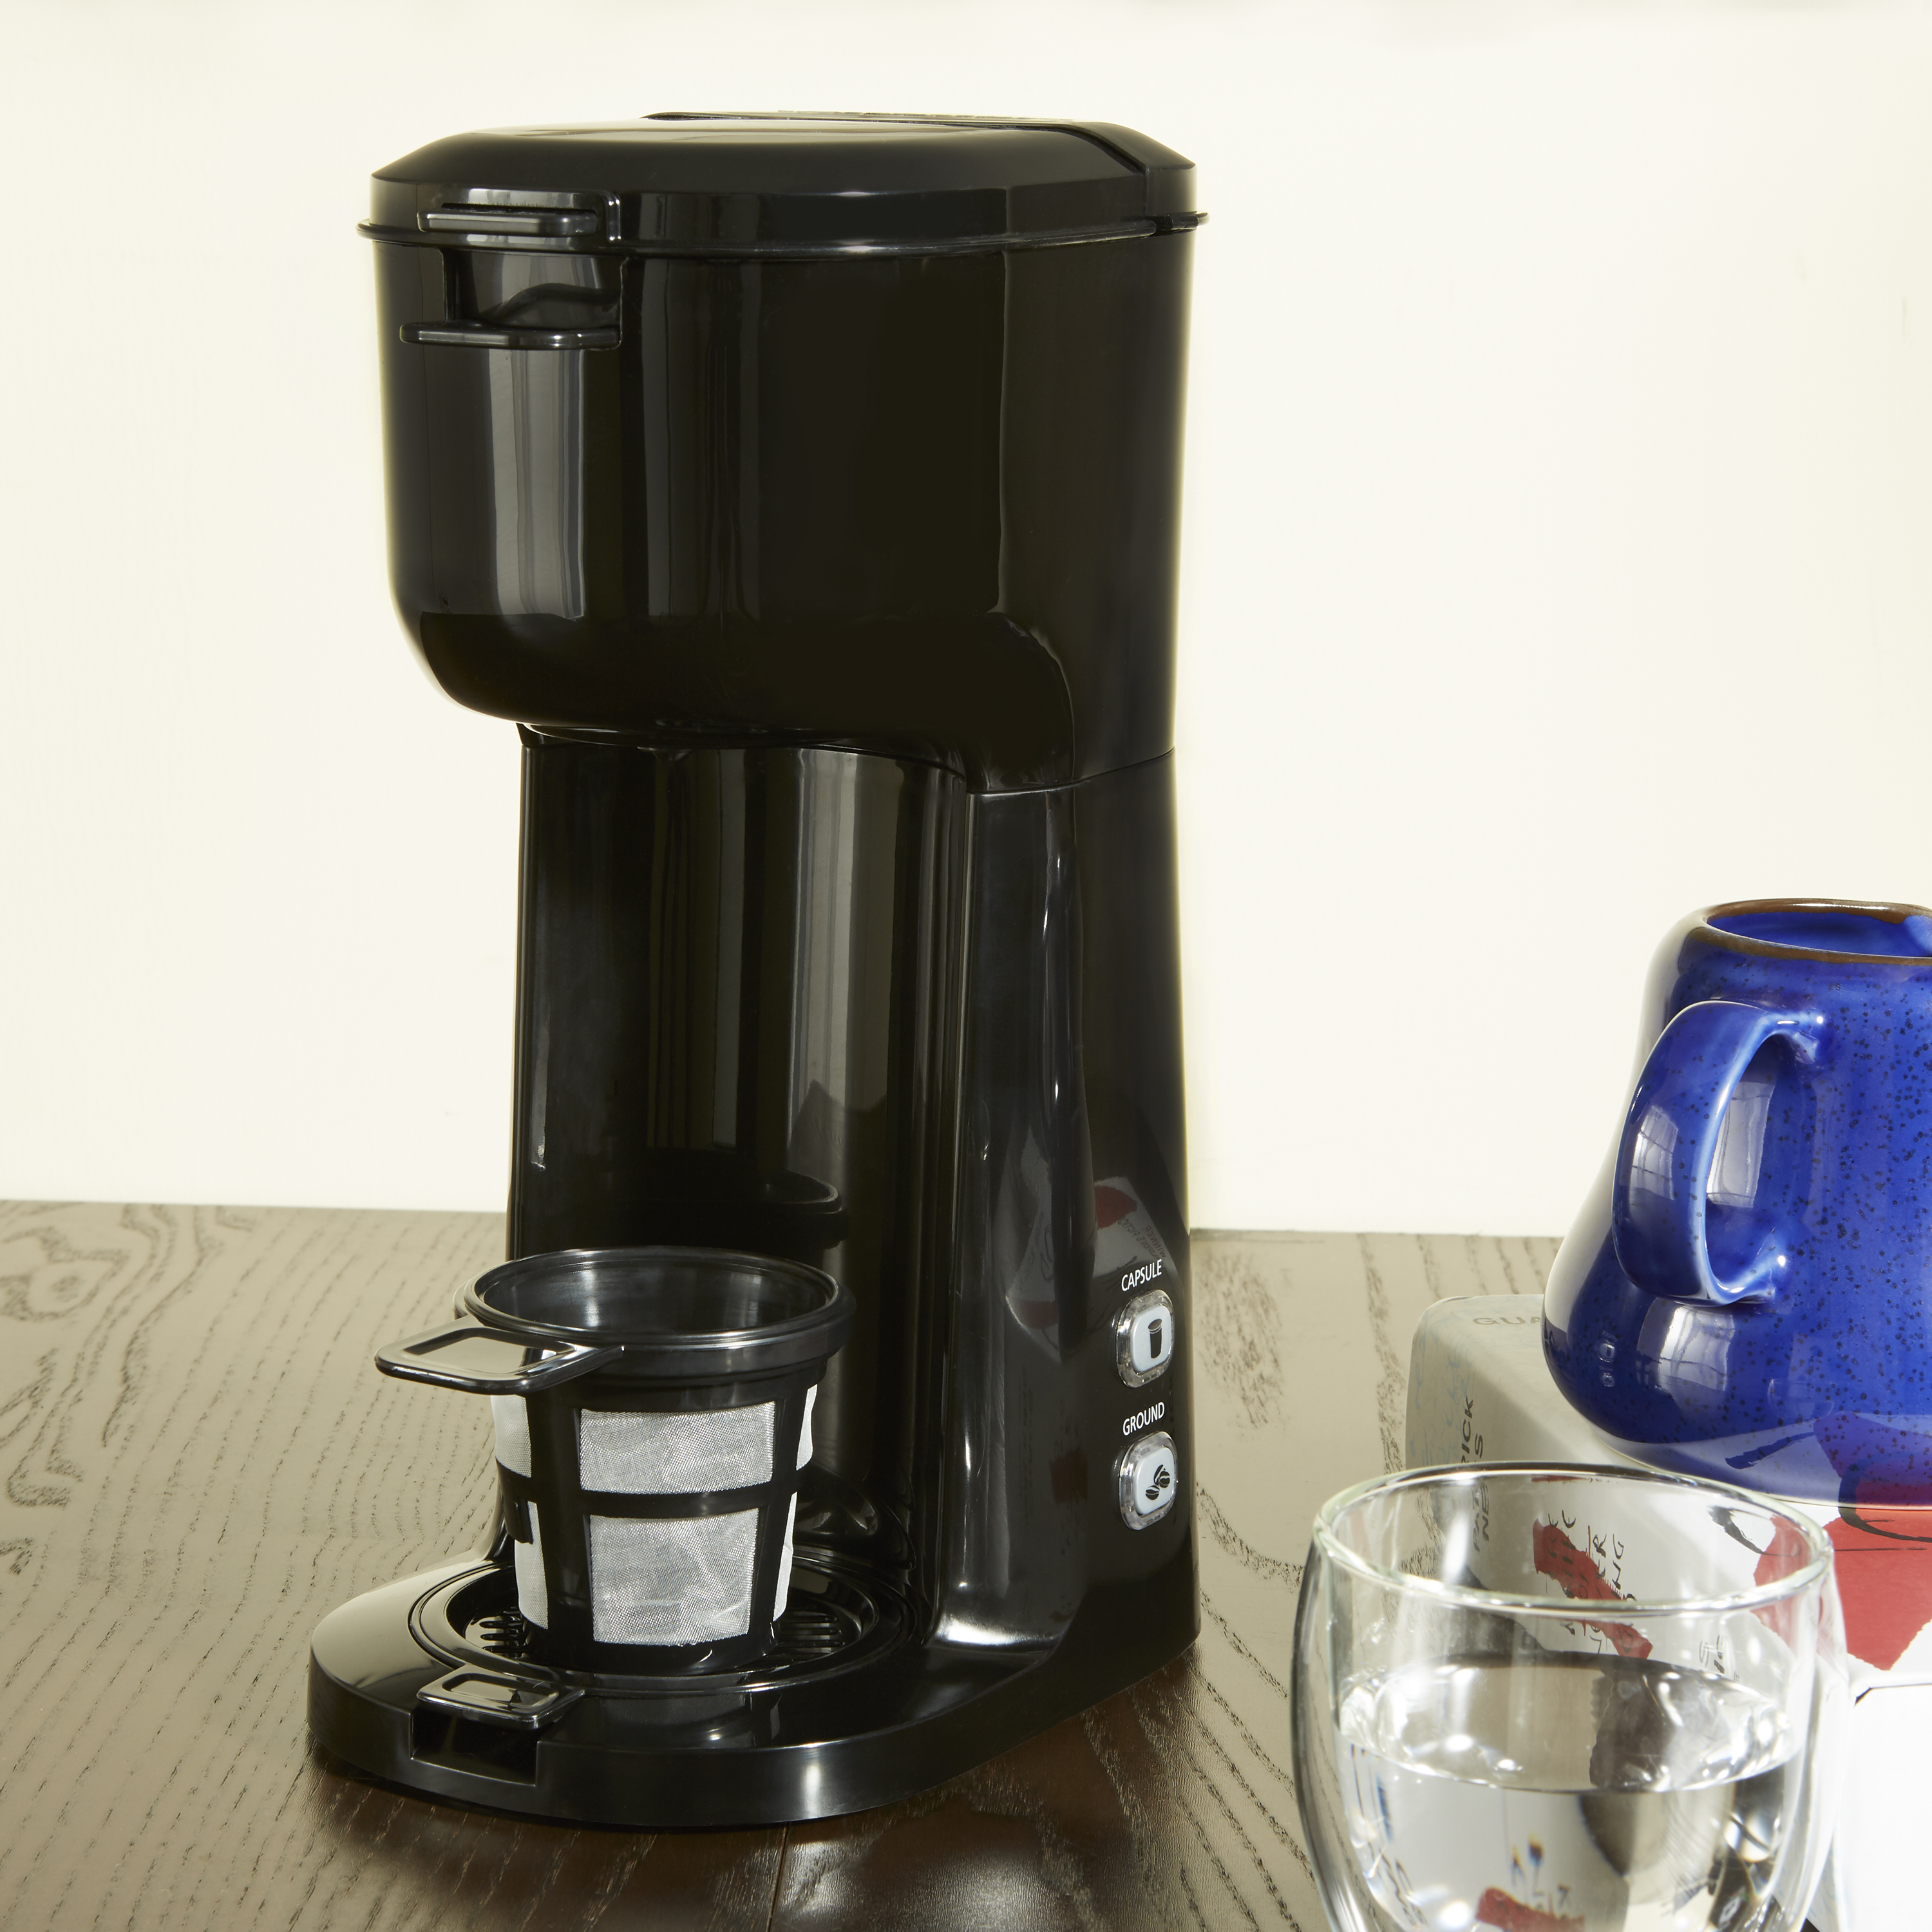 Mainstays Single Serve Coffee Maker, 1 cup Capsule or Ground Coffee, Black, New - image 2 of 6